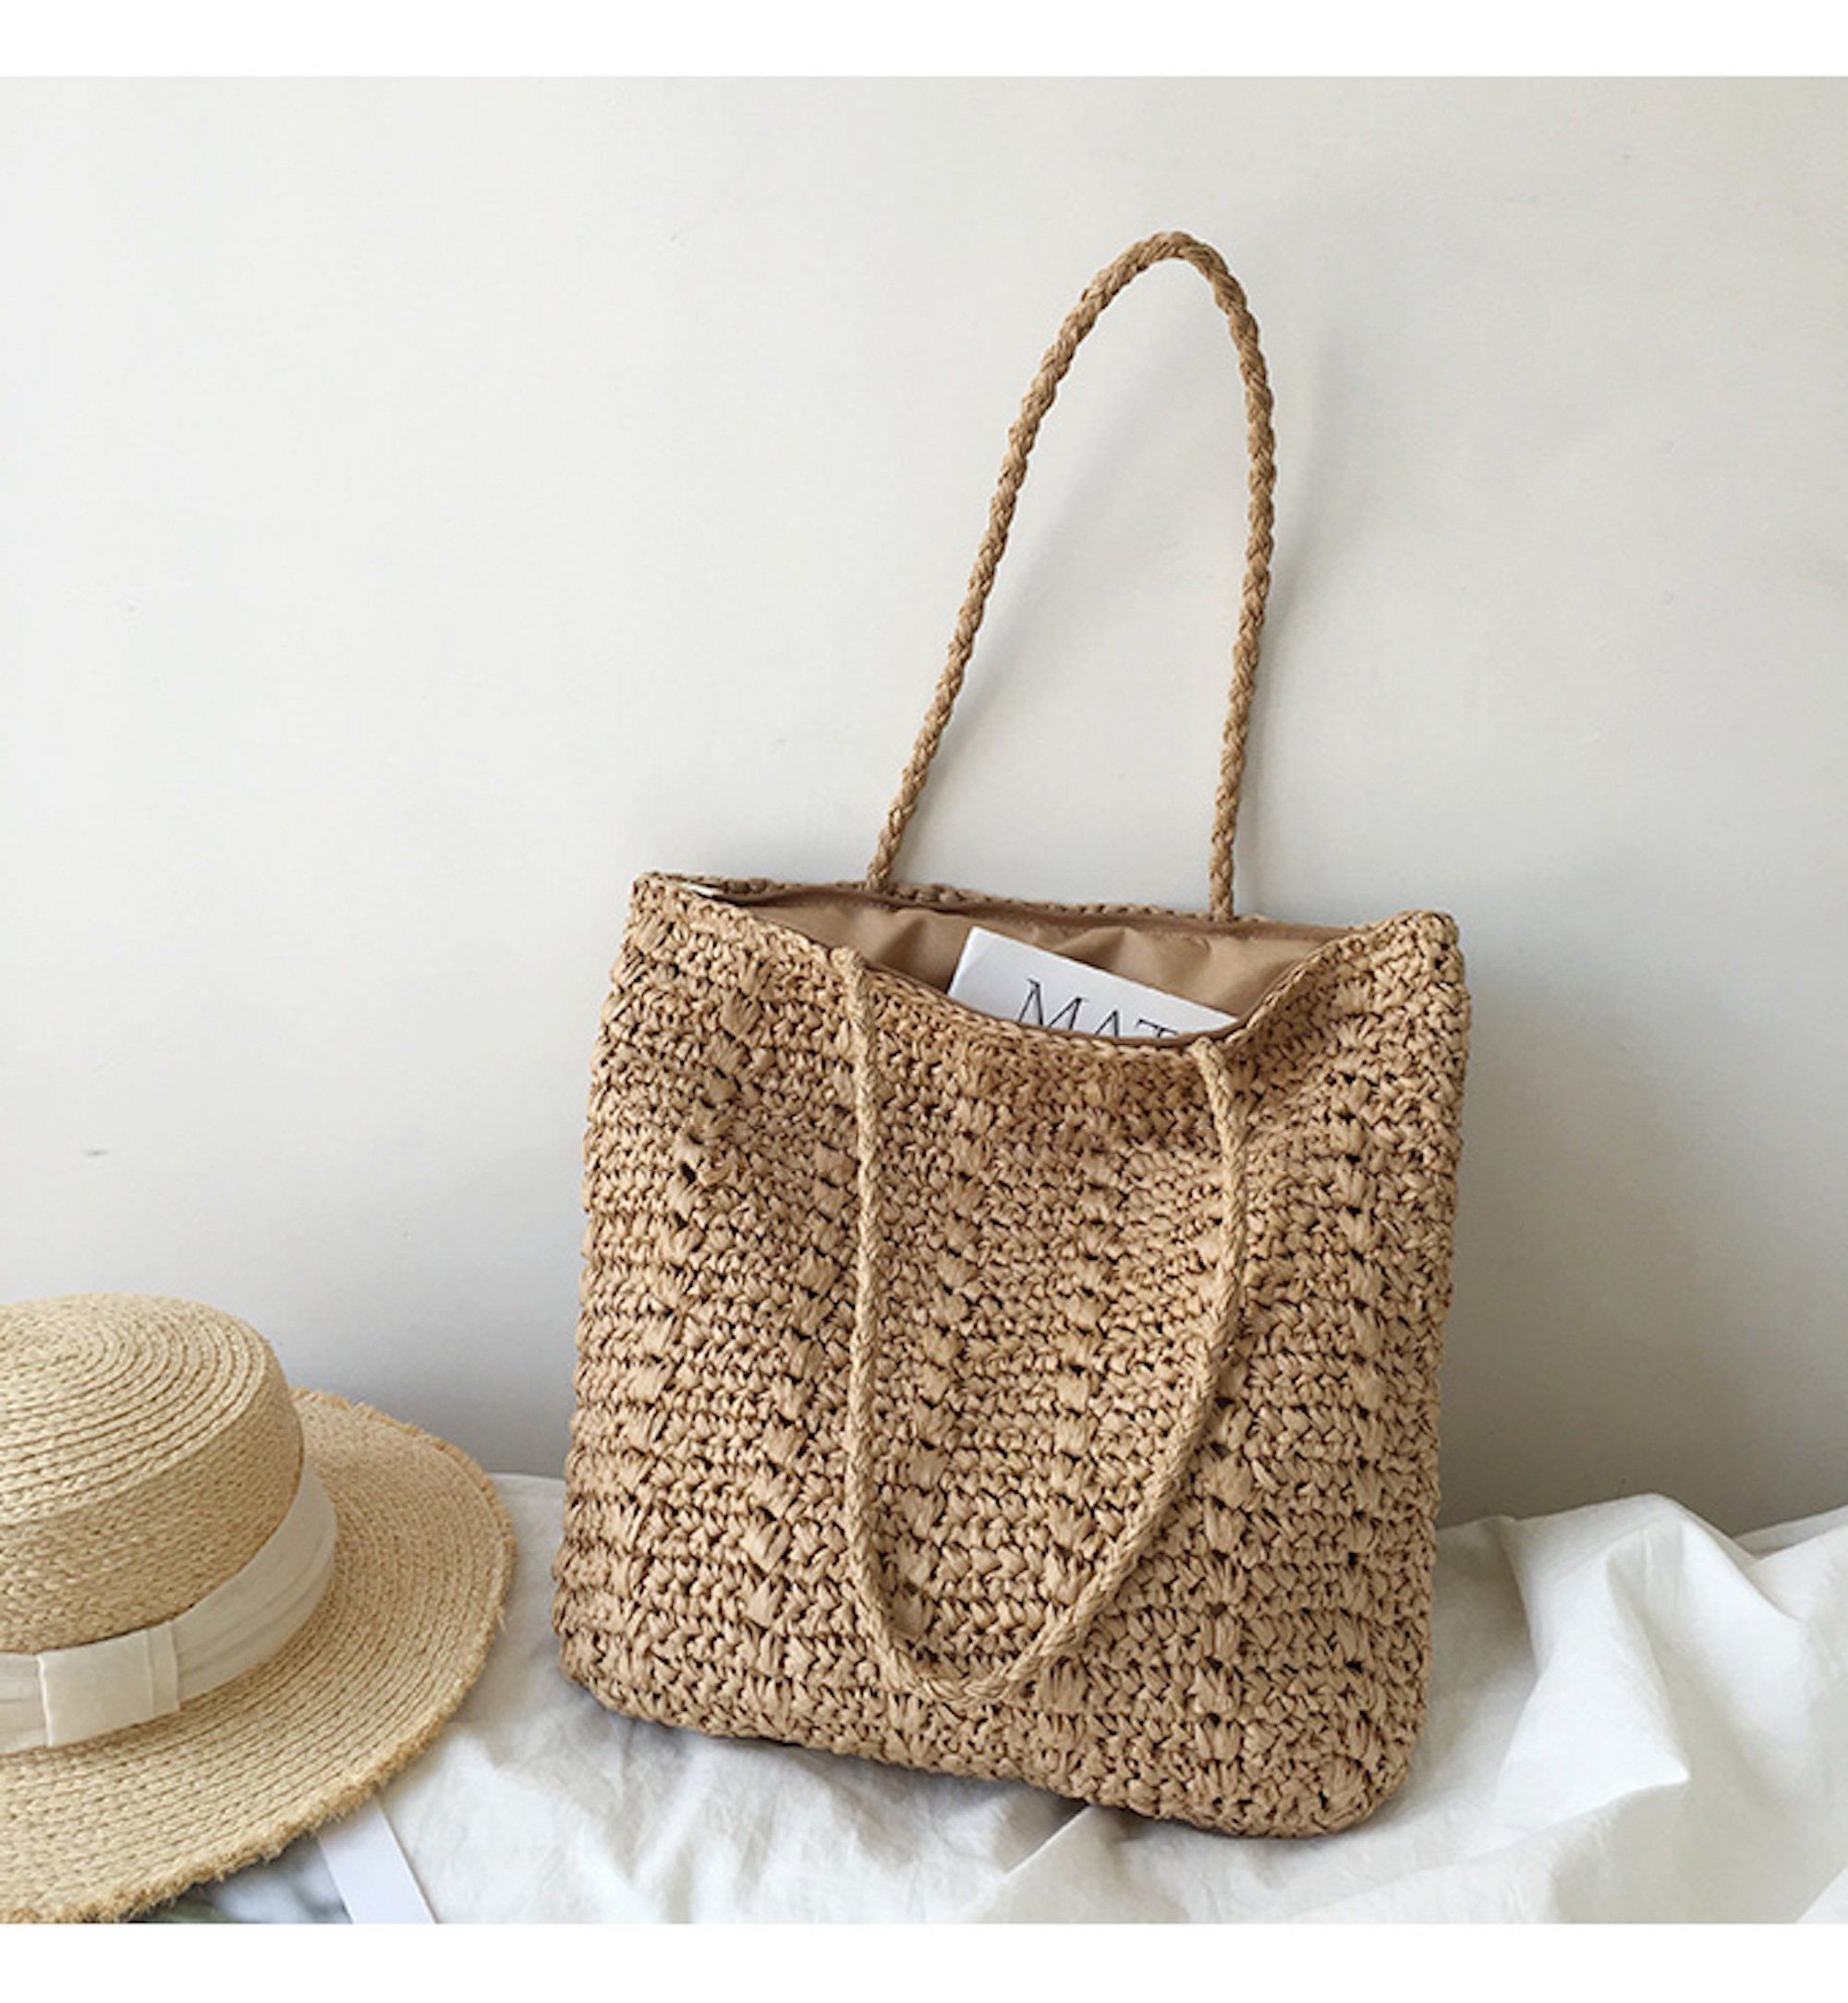 How to Style Straw Tote Bag: 15 Refreshing Outfit Ideas for Ladies